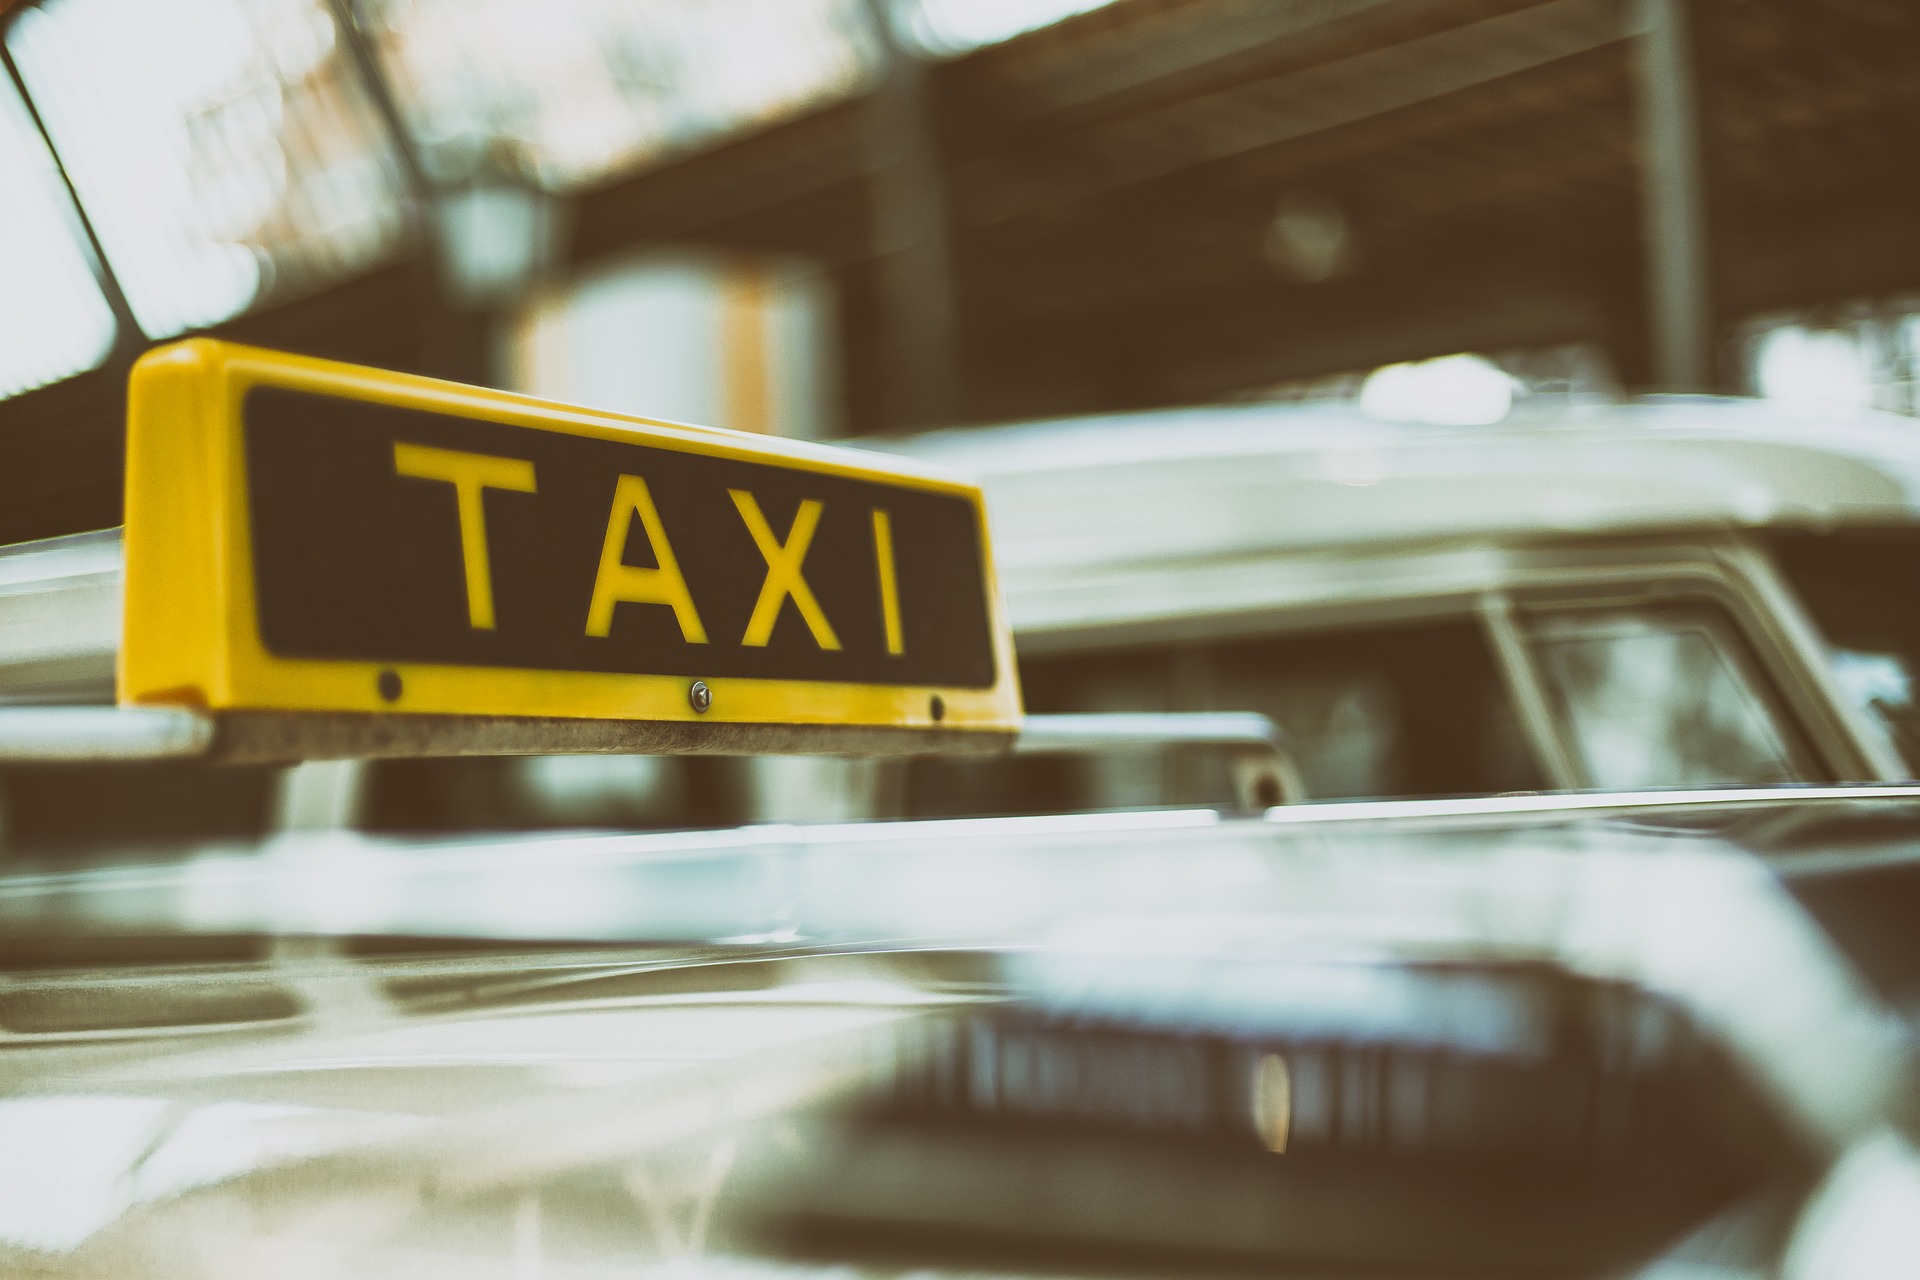 Weekly economic news roundup and taxi tips